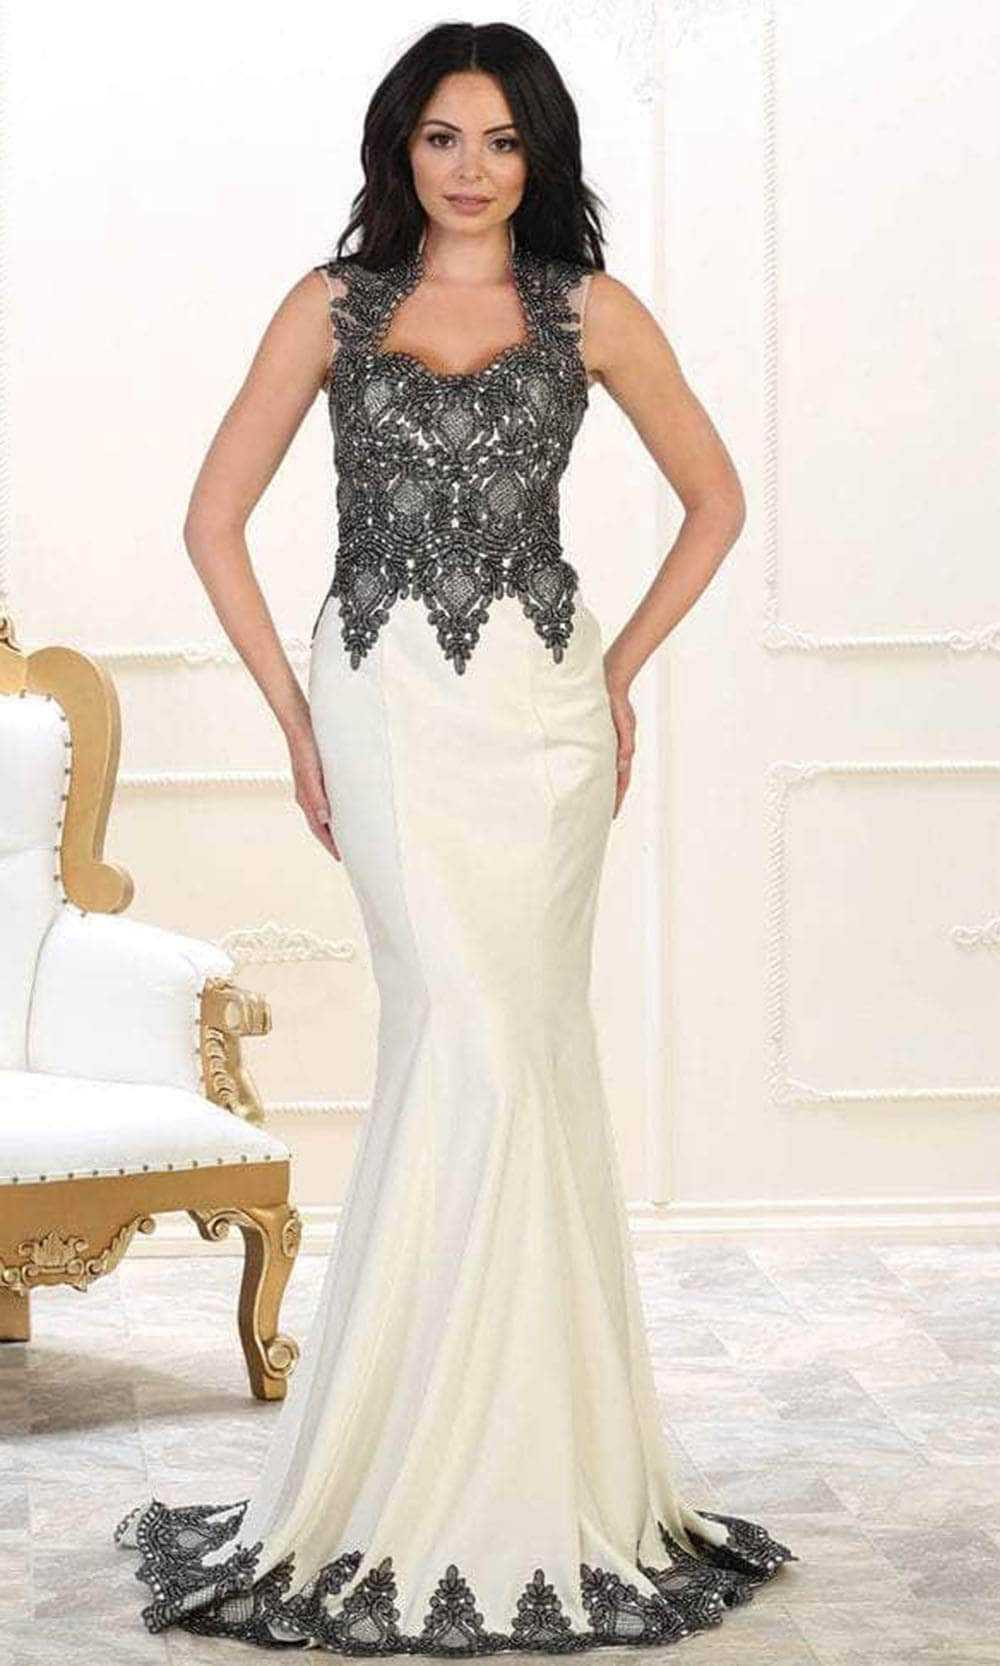 May Queen, May Queen RQ7501 - Lace Detail Mermaid Prom Dress